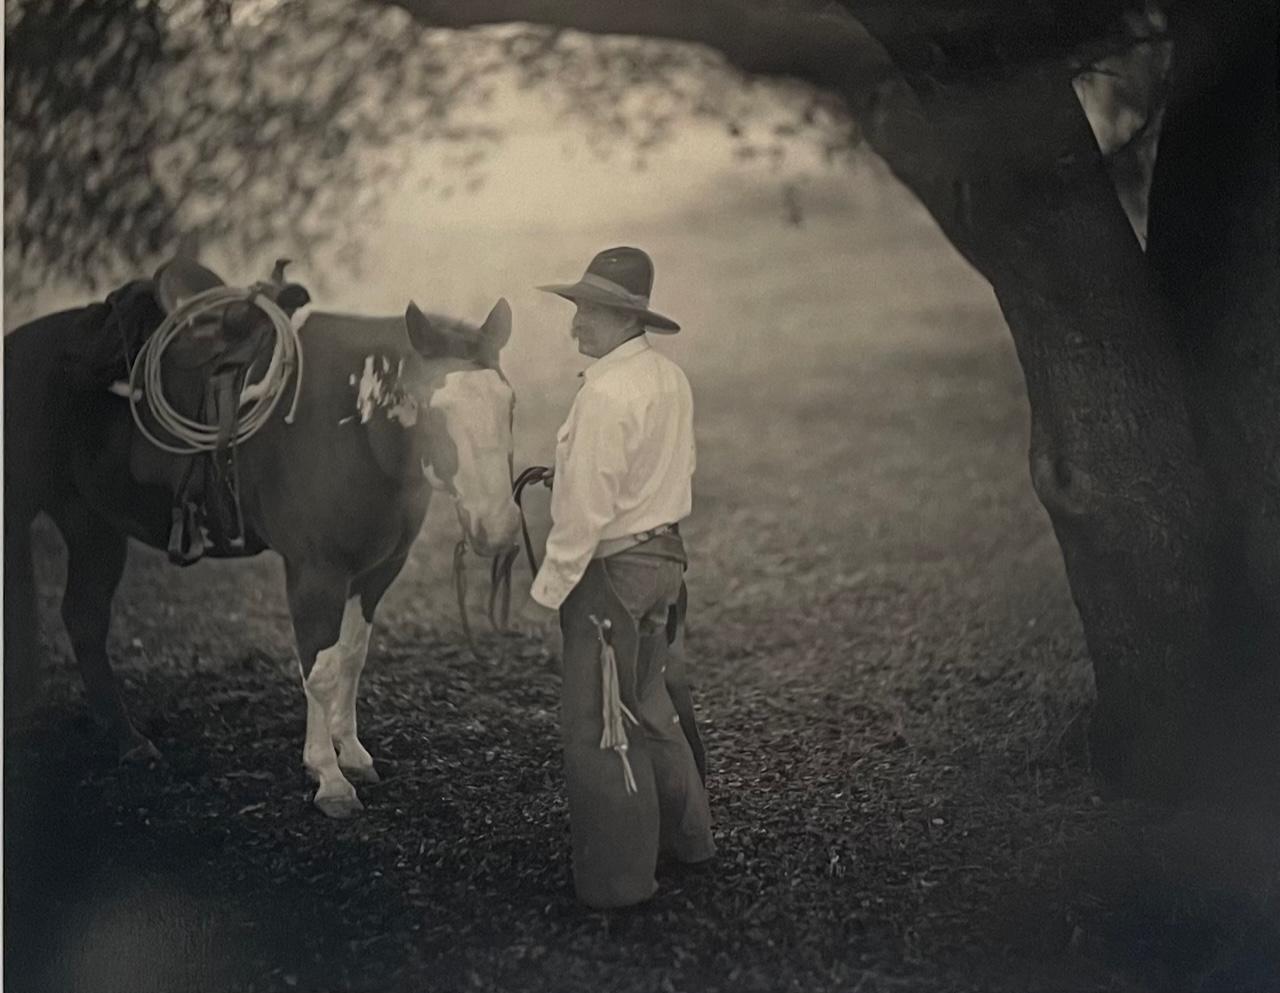 Phil Kember Black and White Photograph - Big Oak, Cowboy with Horse by Tree Sepia Toned